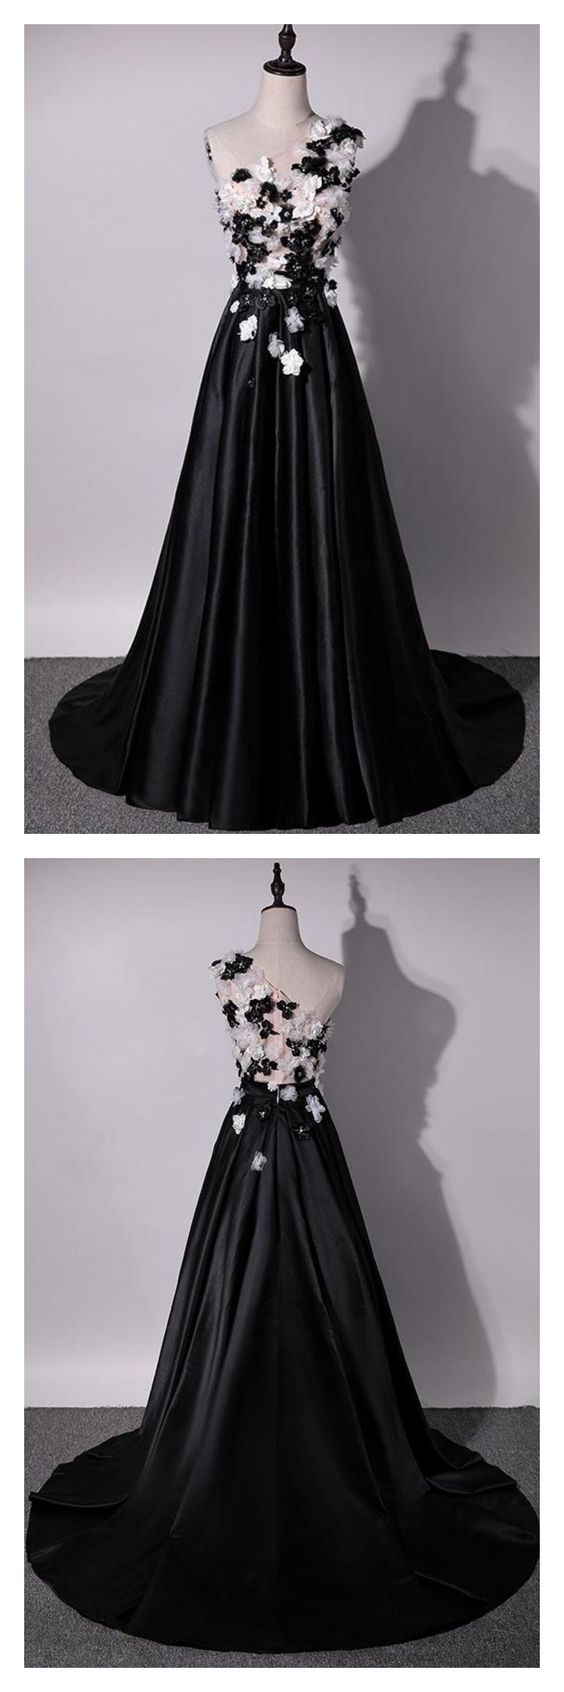 Black Satin Long Prom Dress, One Shoulder Prom Dress With Flowers , Long Evening Dress, Sexy A Line Women Party Gowns